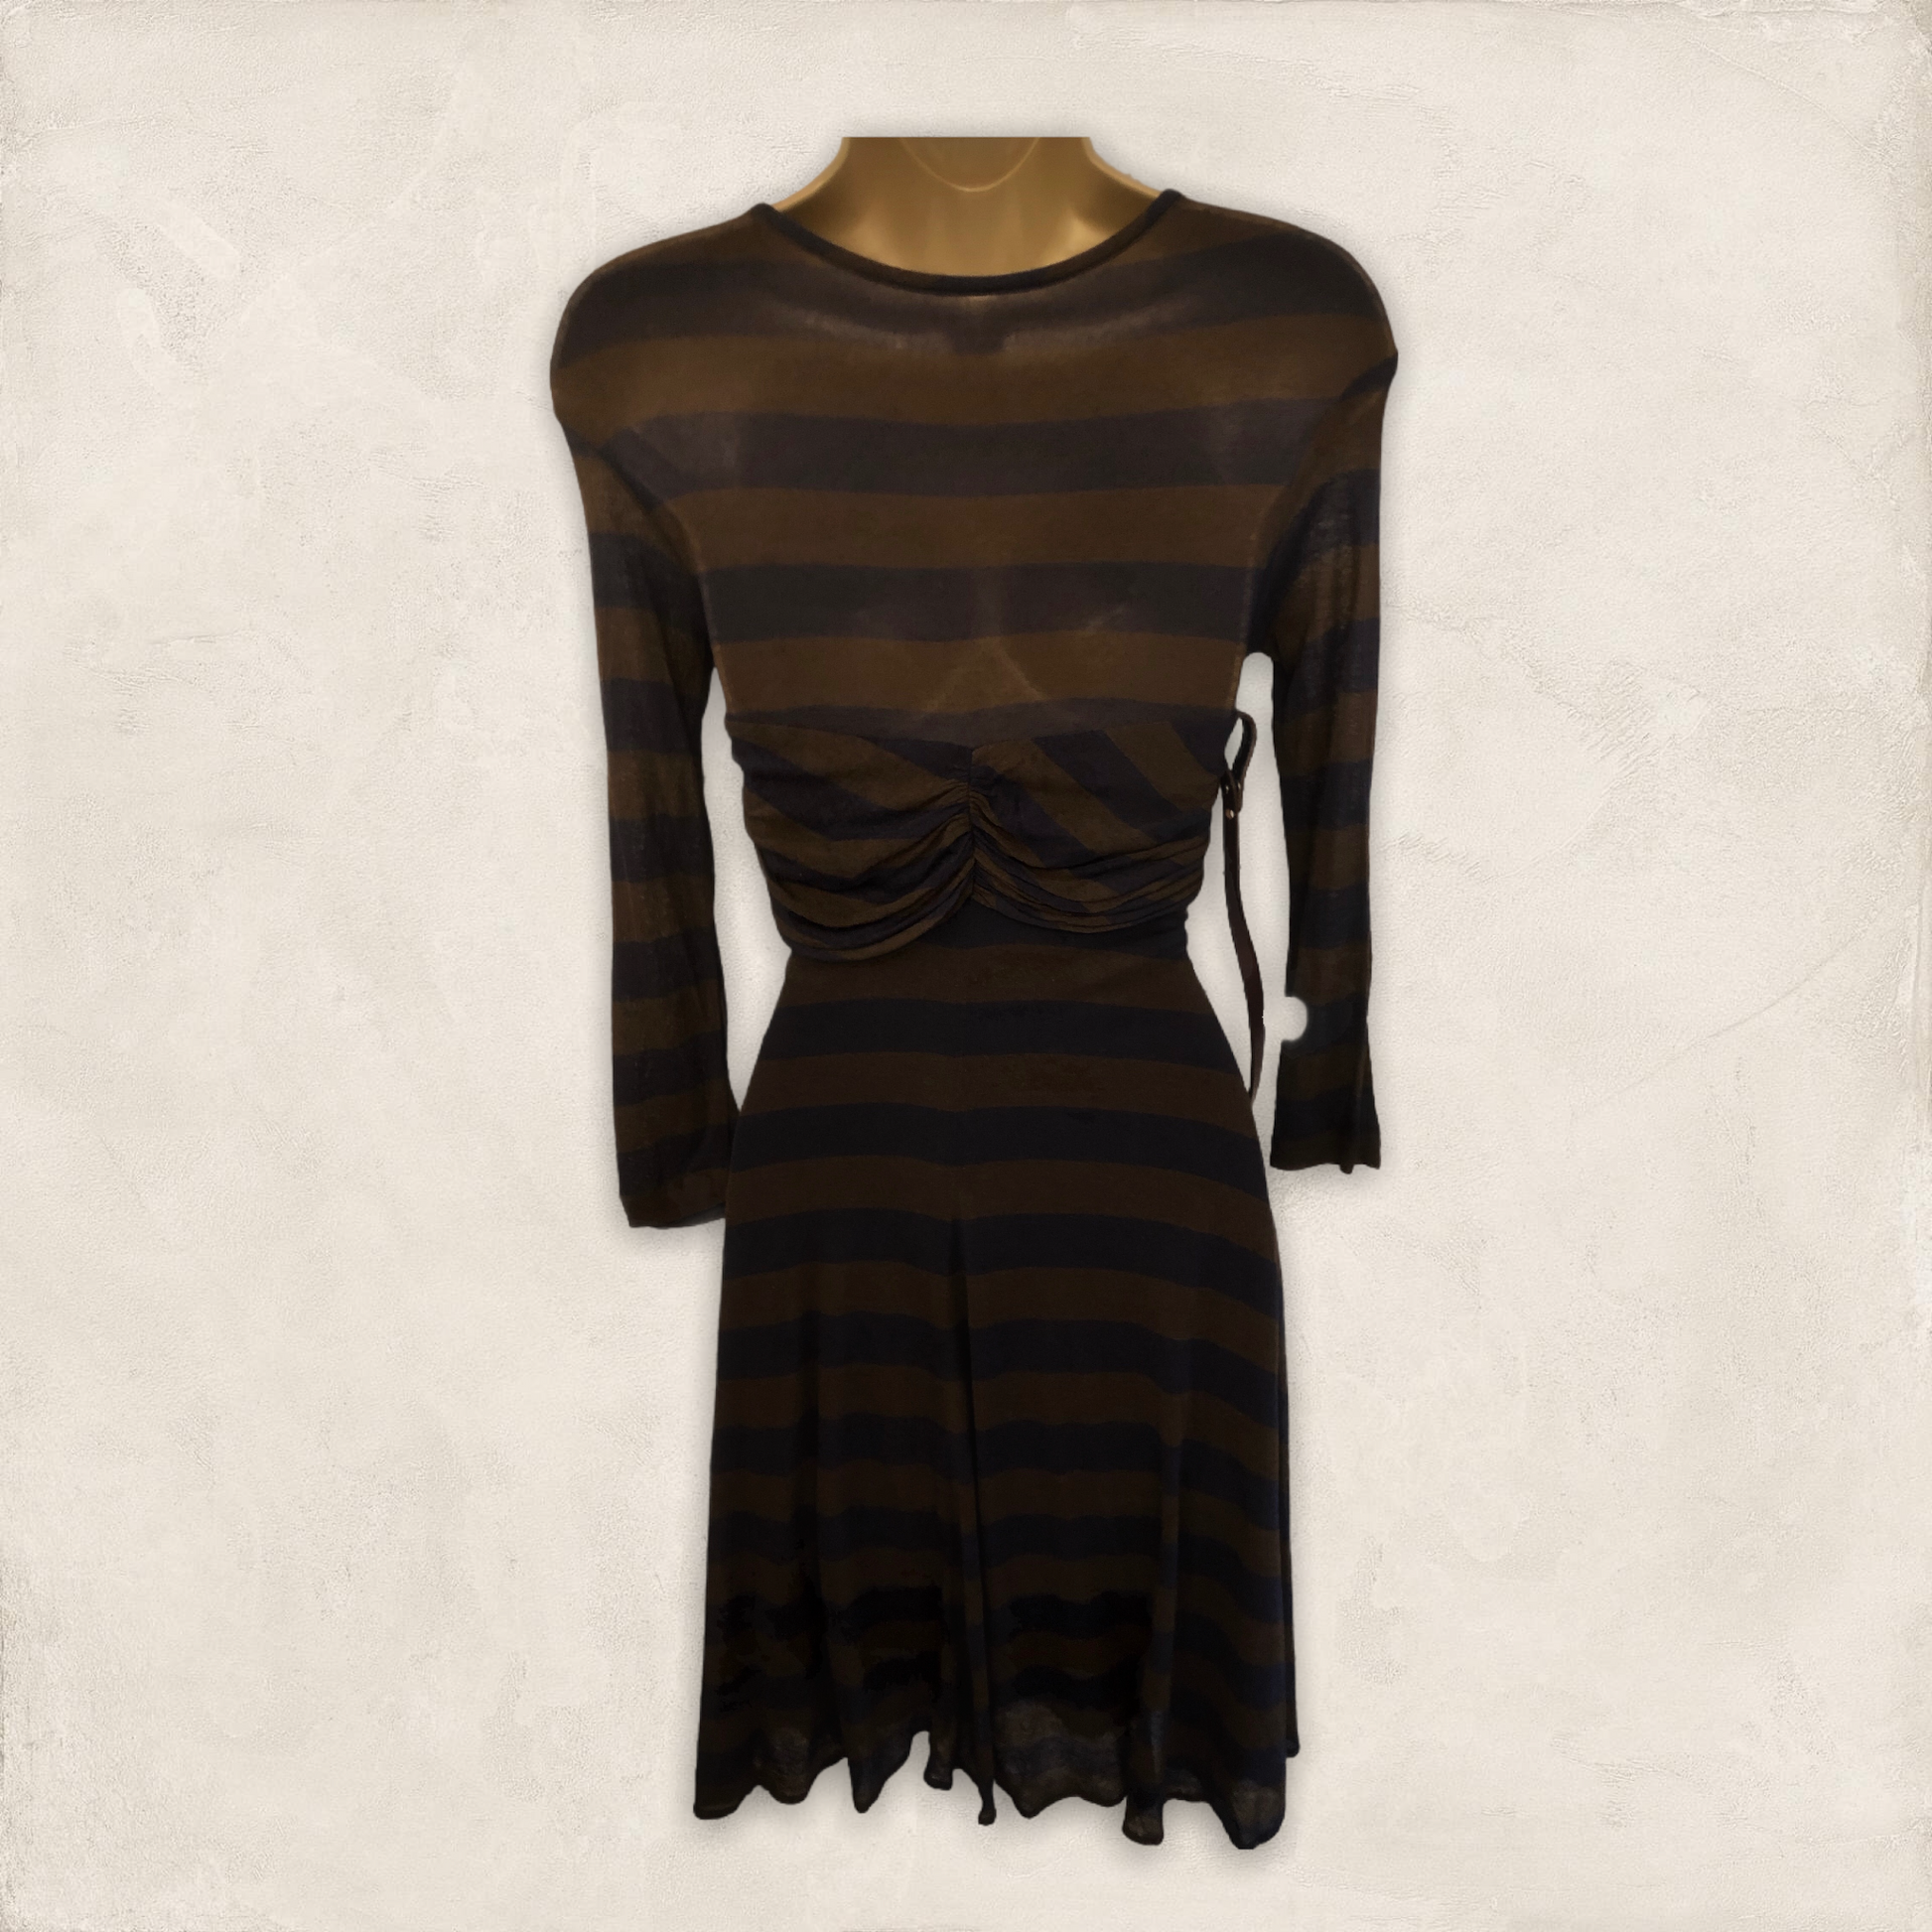 Yigal Azrouel Storm Blue & Earth Brown Striped Dress UK 6 US 2 BNWT RRP £490 Timeless Fashions